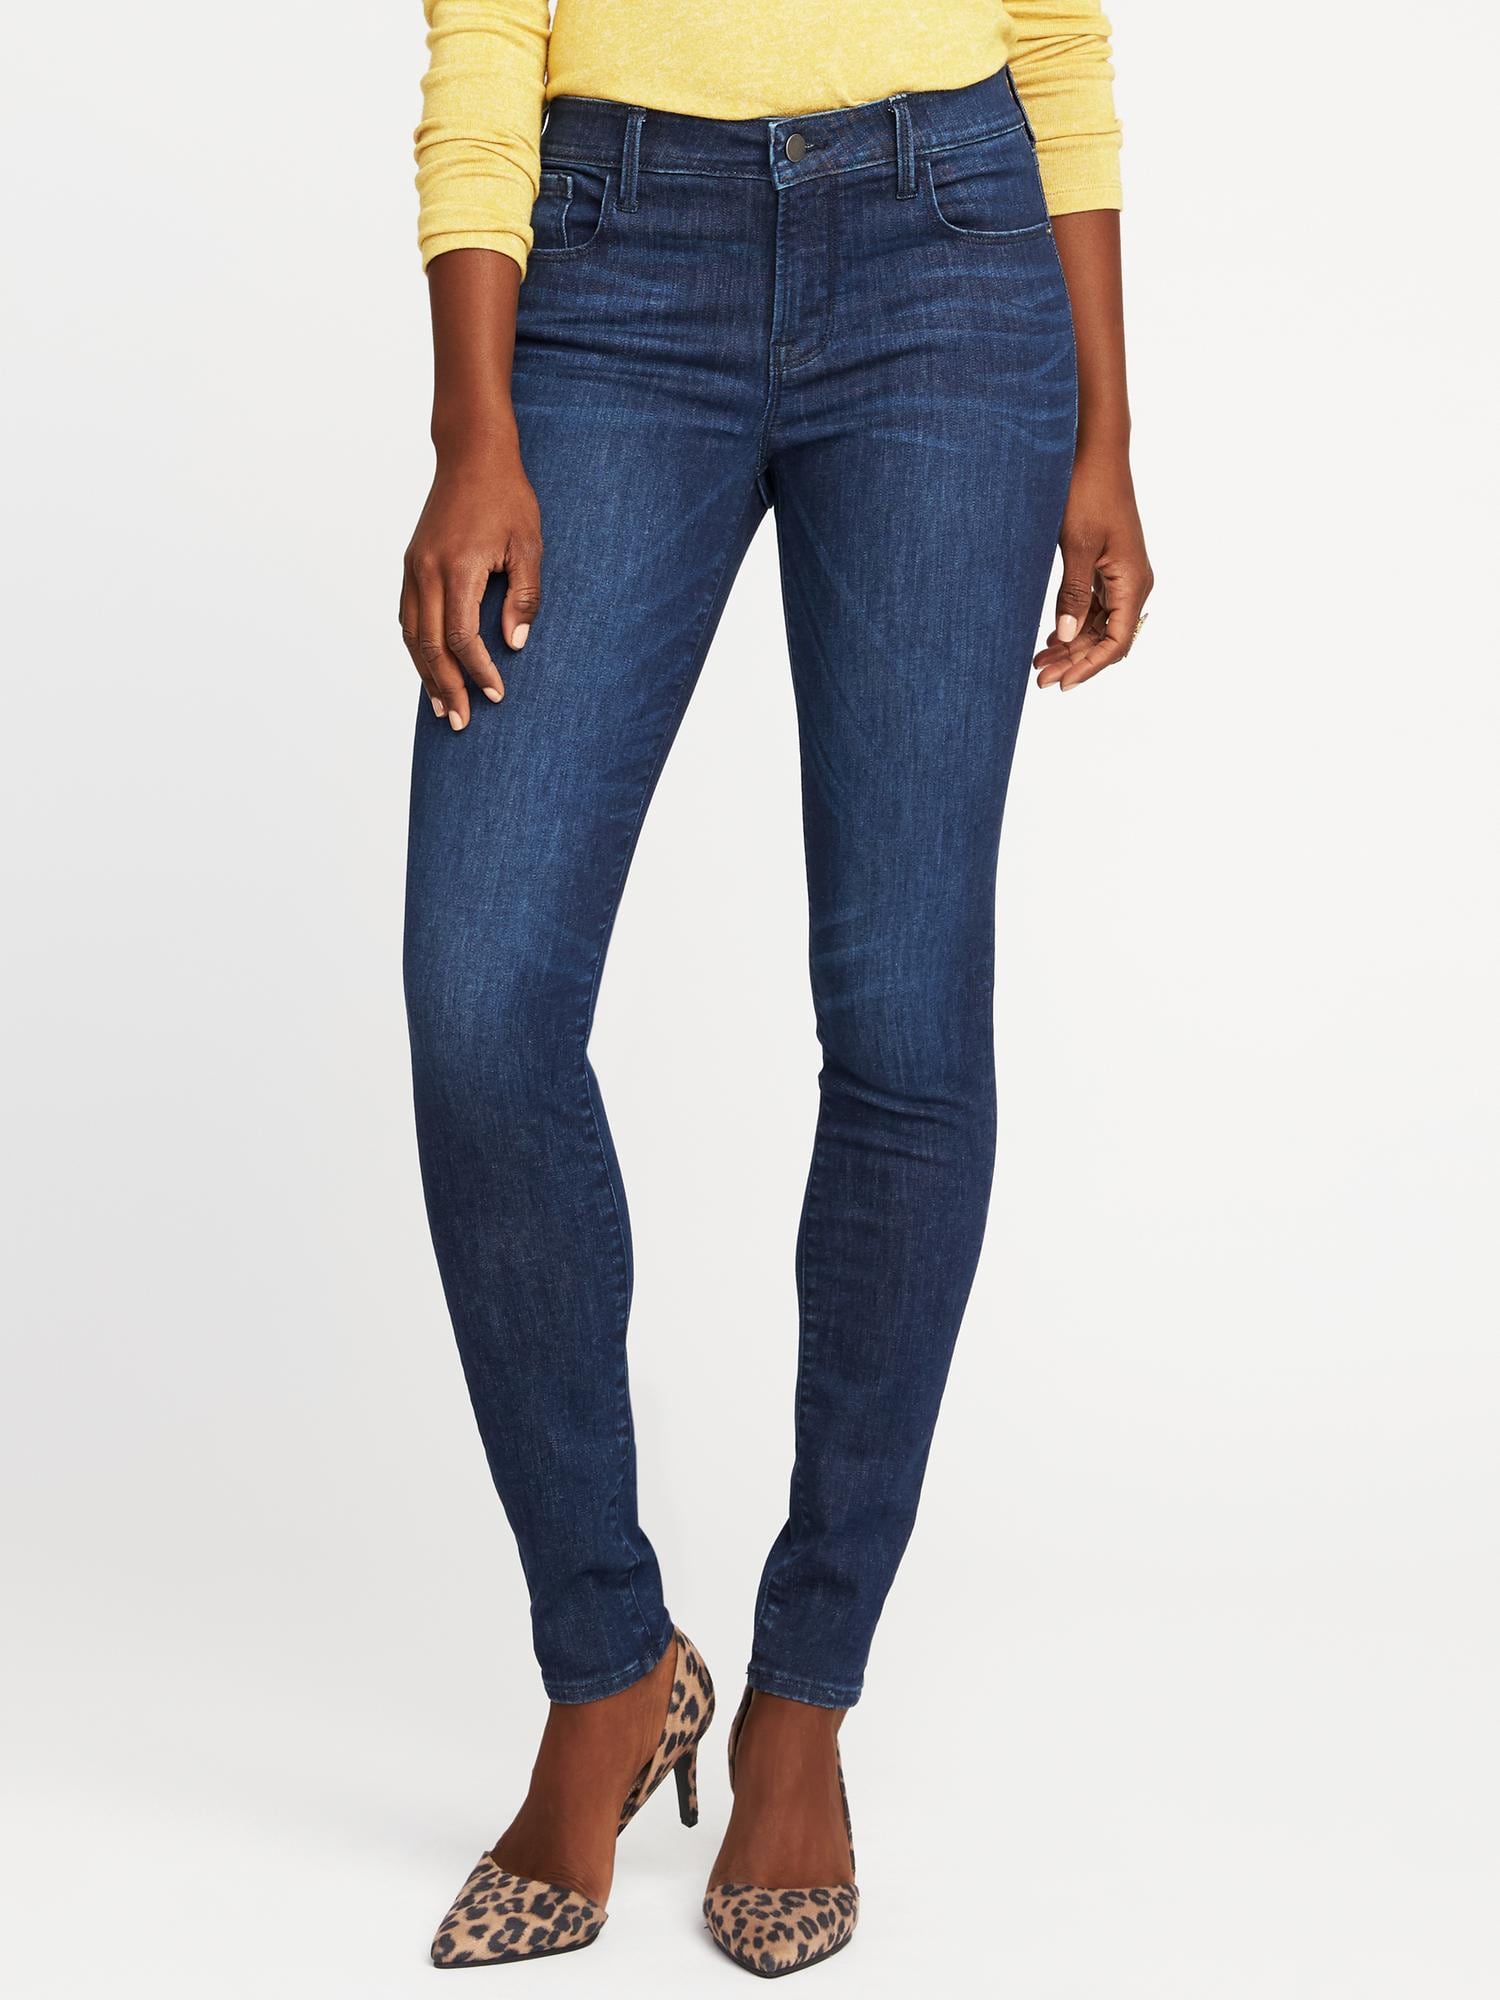 old navy rockstar jeans mid rise